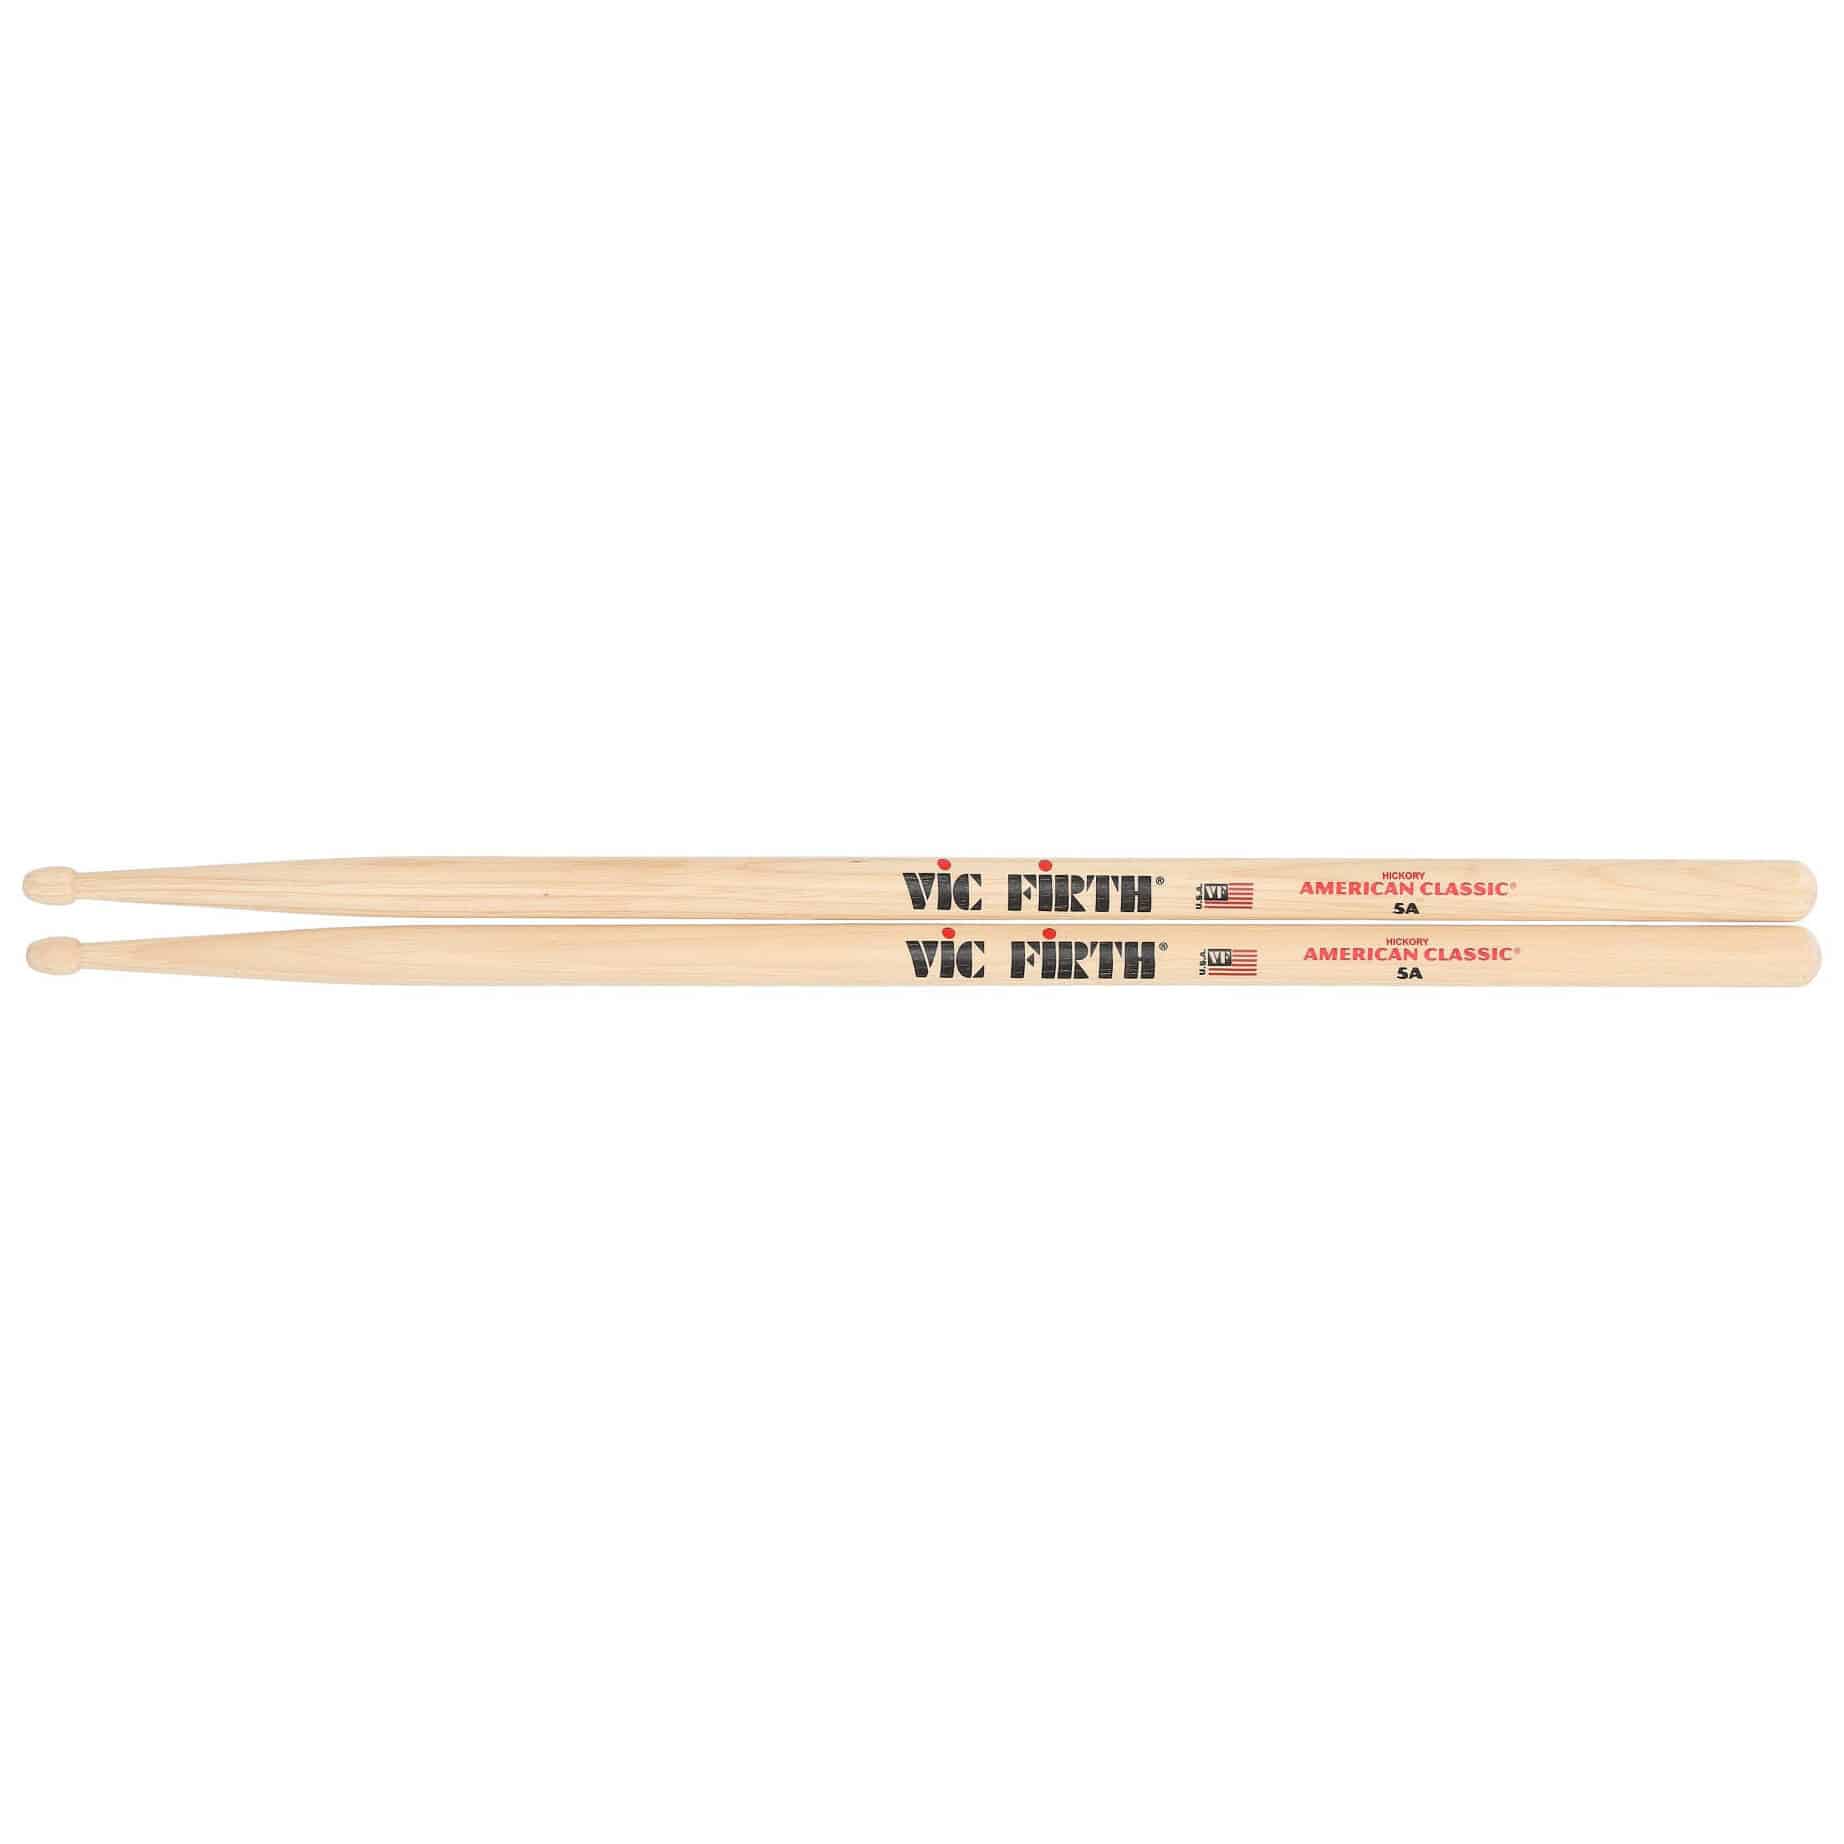 Vic Firth 5A - American Classic - Hickory - Wood Tip 1